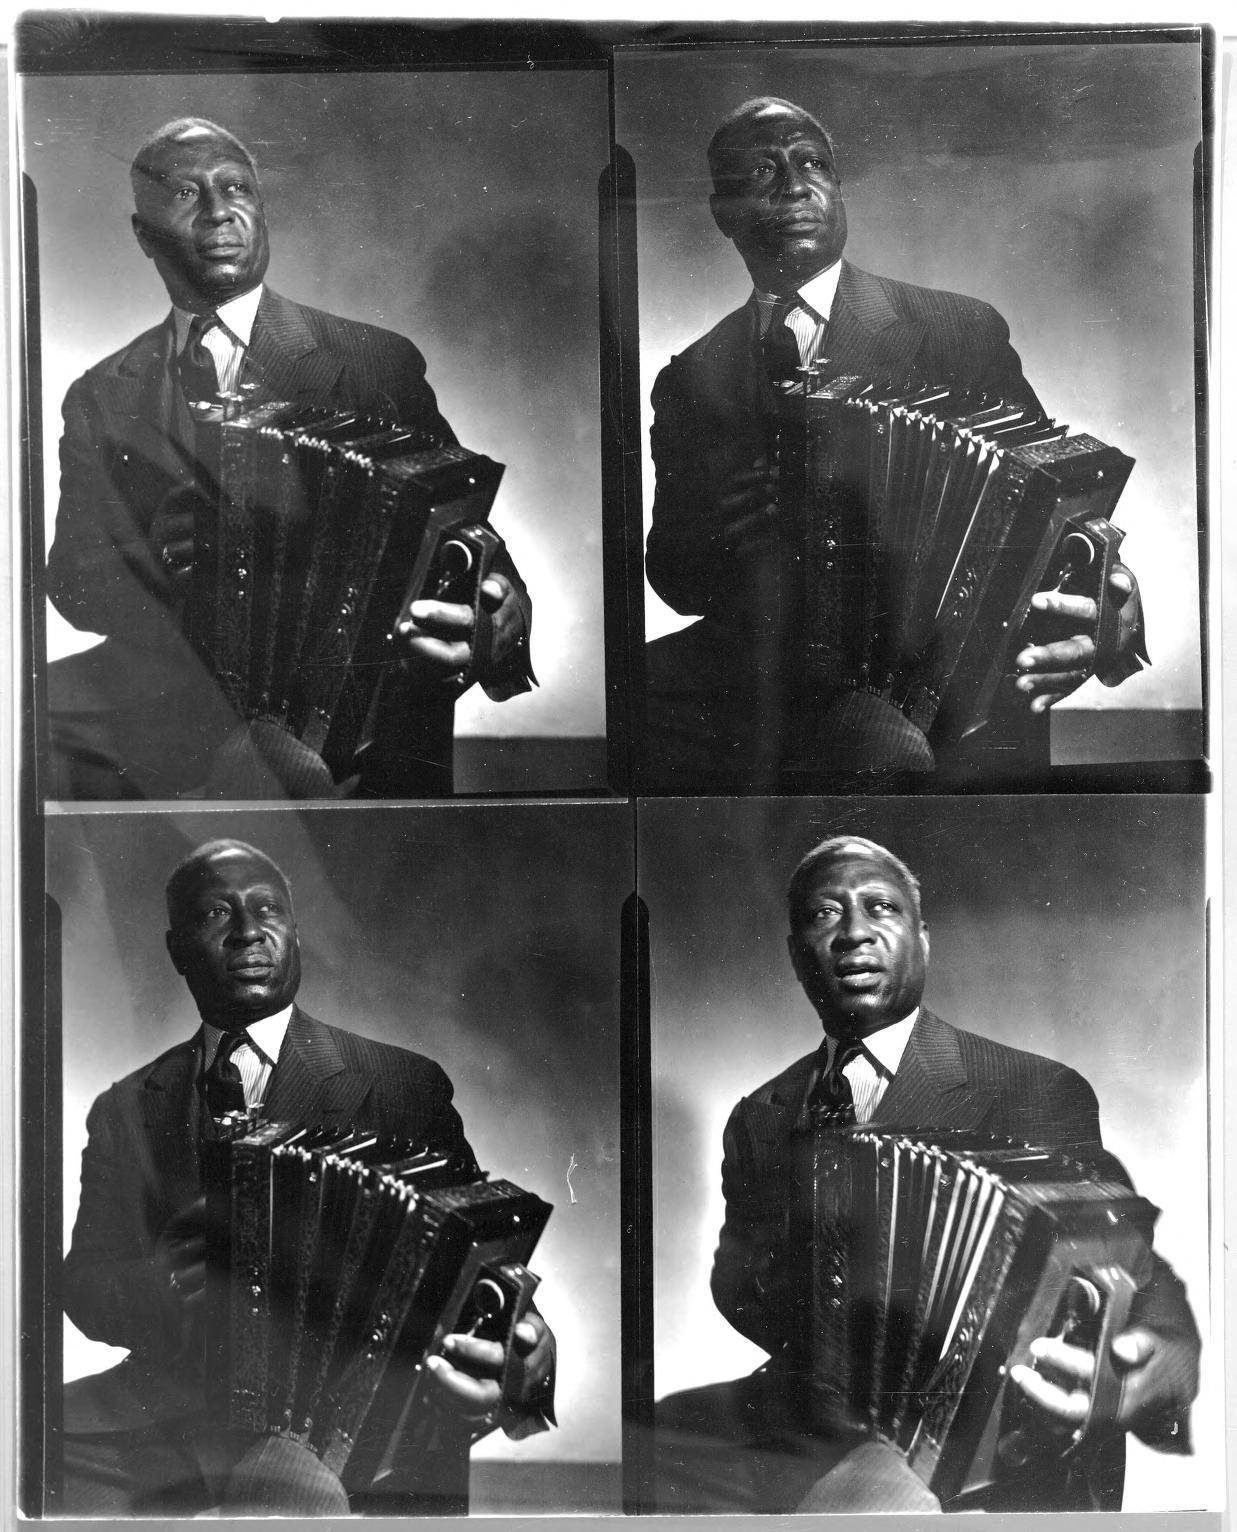 American Folk And Blues Singer Leadbelly With Accordion 1942 Illustration Picture